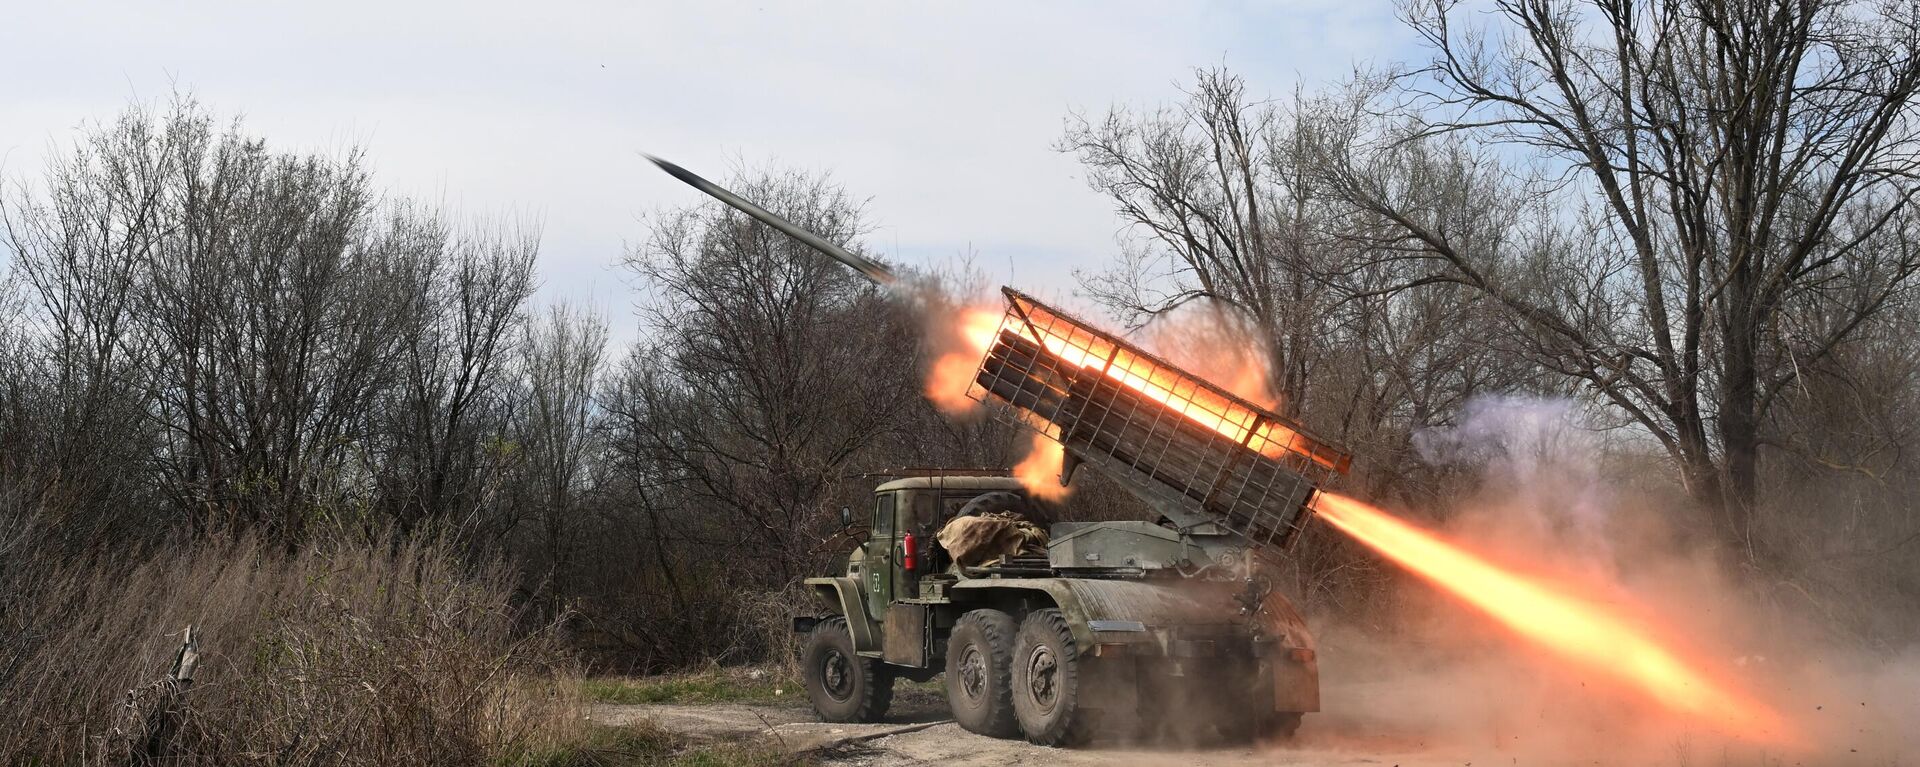 The Grad multiple launch rocket system (MLRS) of the Southern Group of Forces fires at positions of the Ukrainian troops in the zone of a special military operation. - Sputnik International, 1920, 01.05.2024